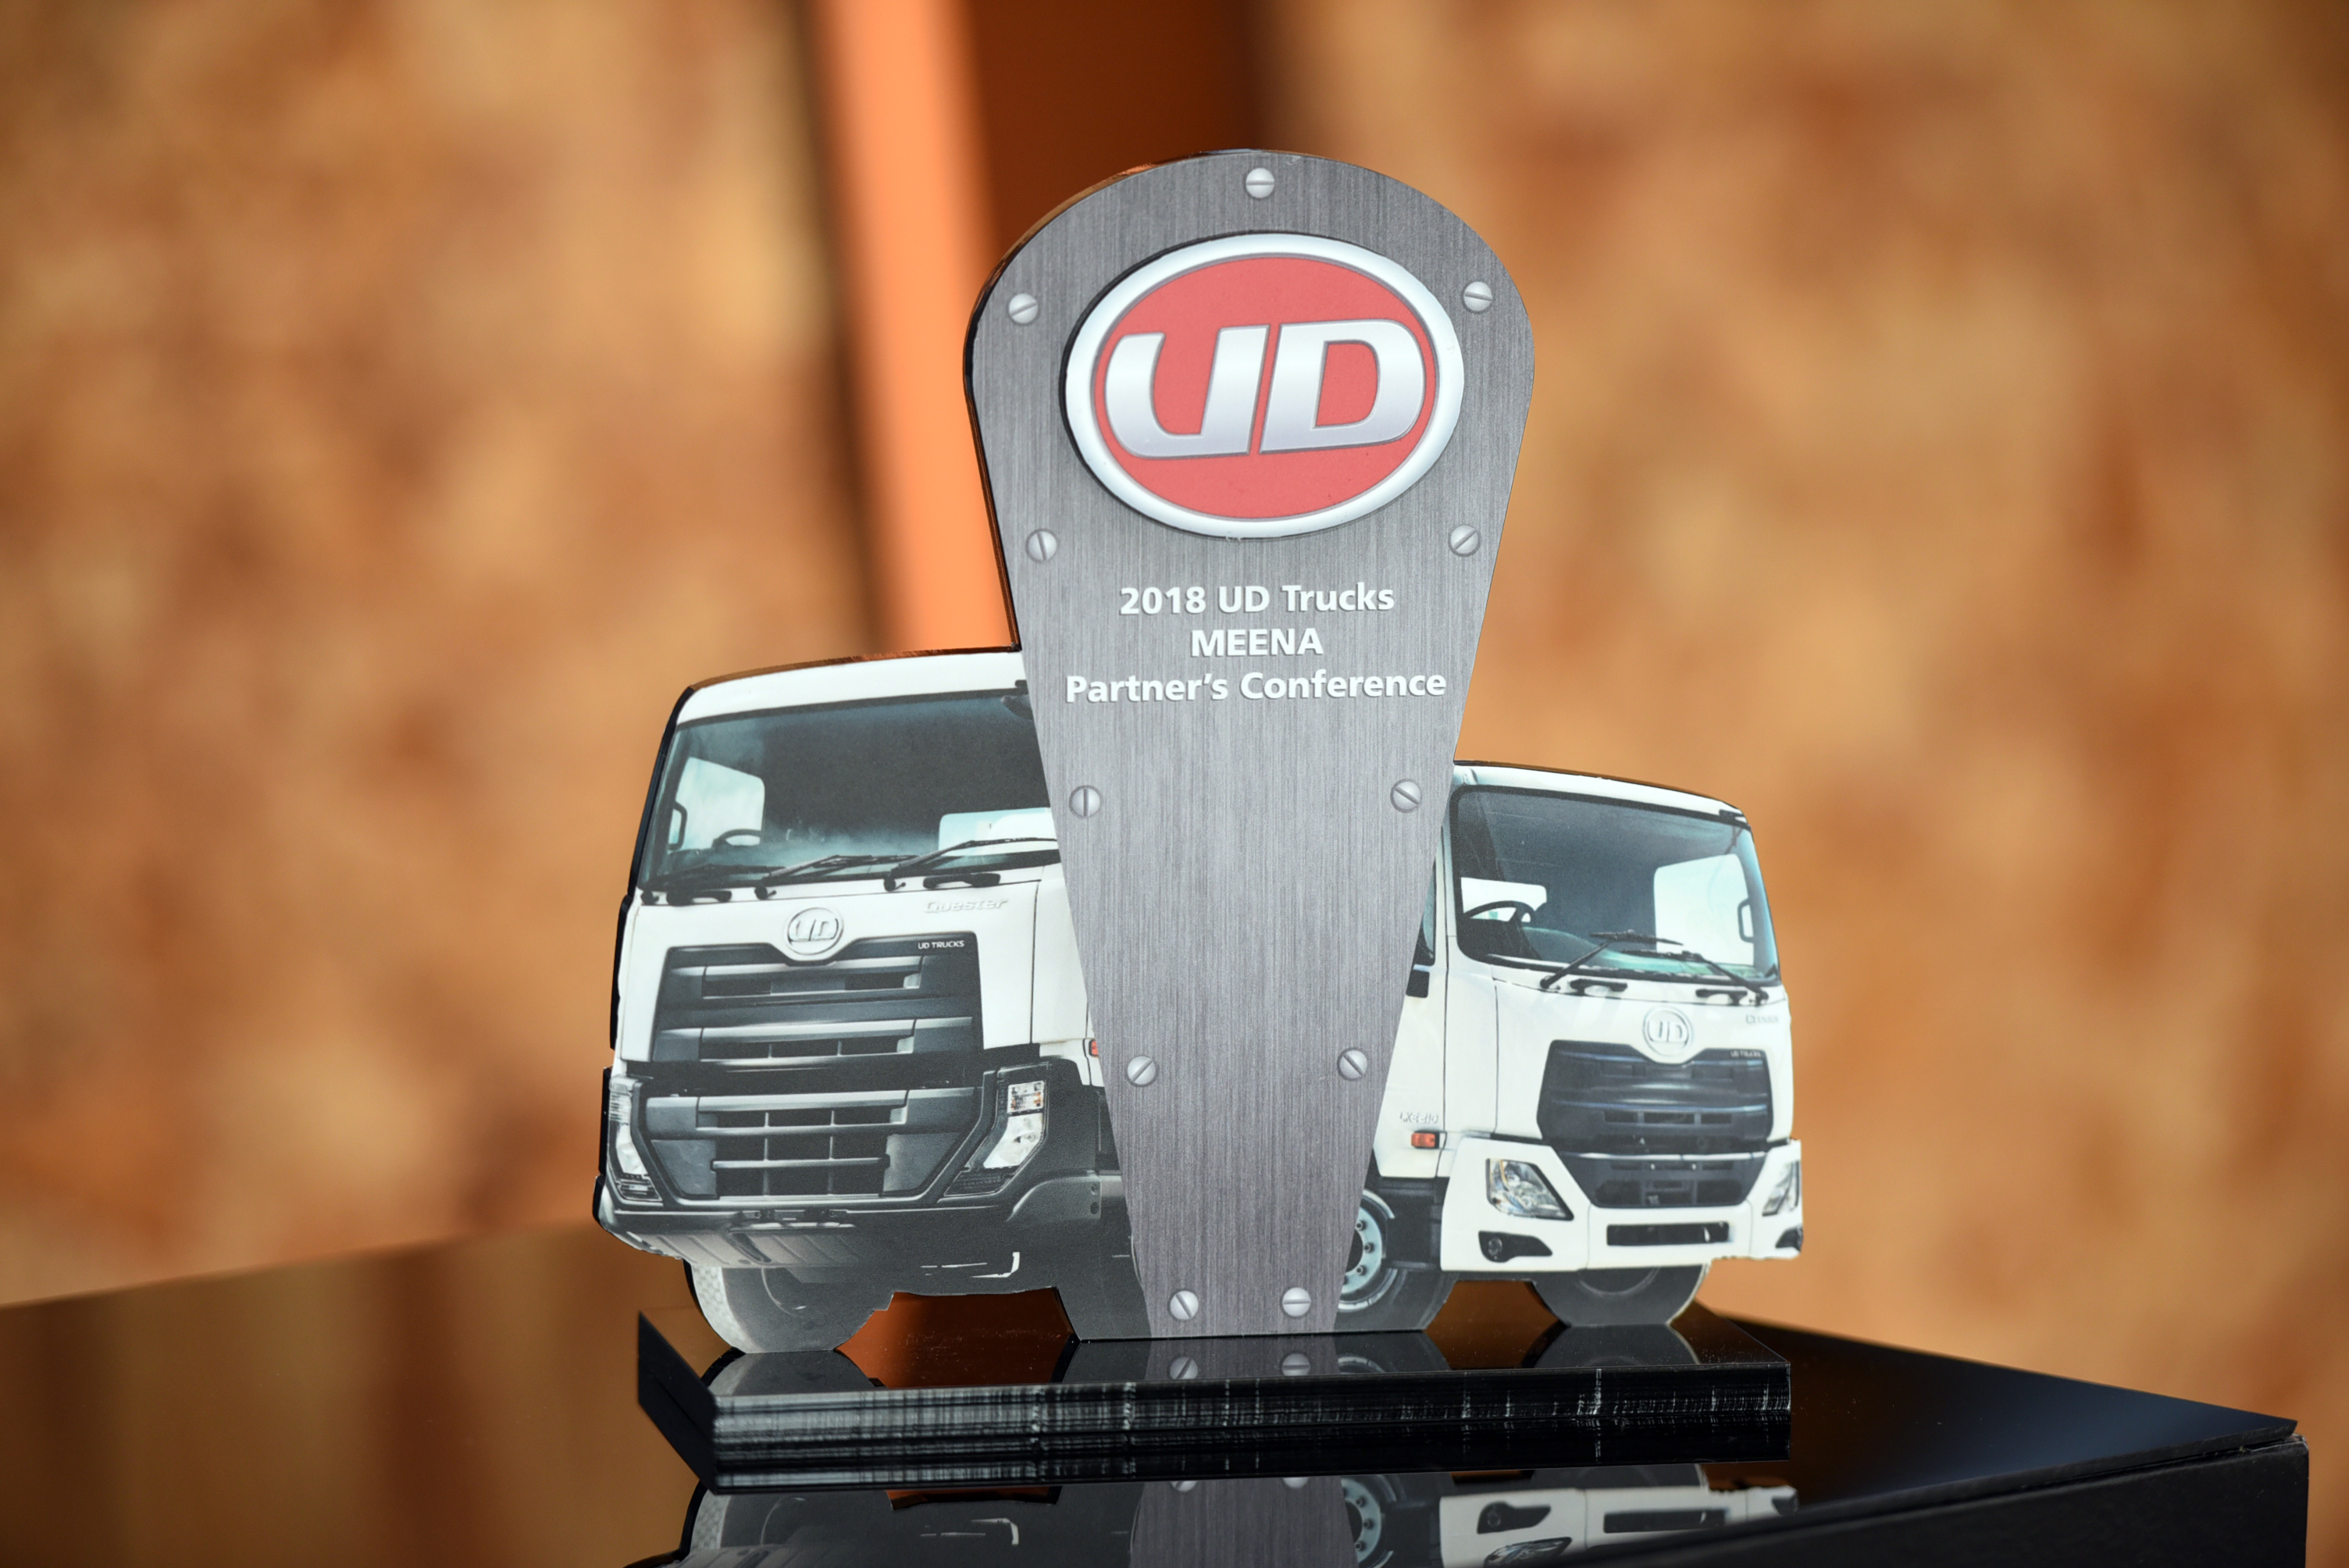 Al Masaood Commercial Vehicles & Equipment Division awarded ‘Best Partner’s Success Story’ for 2017